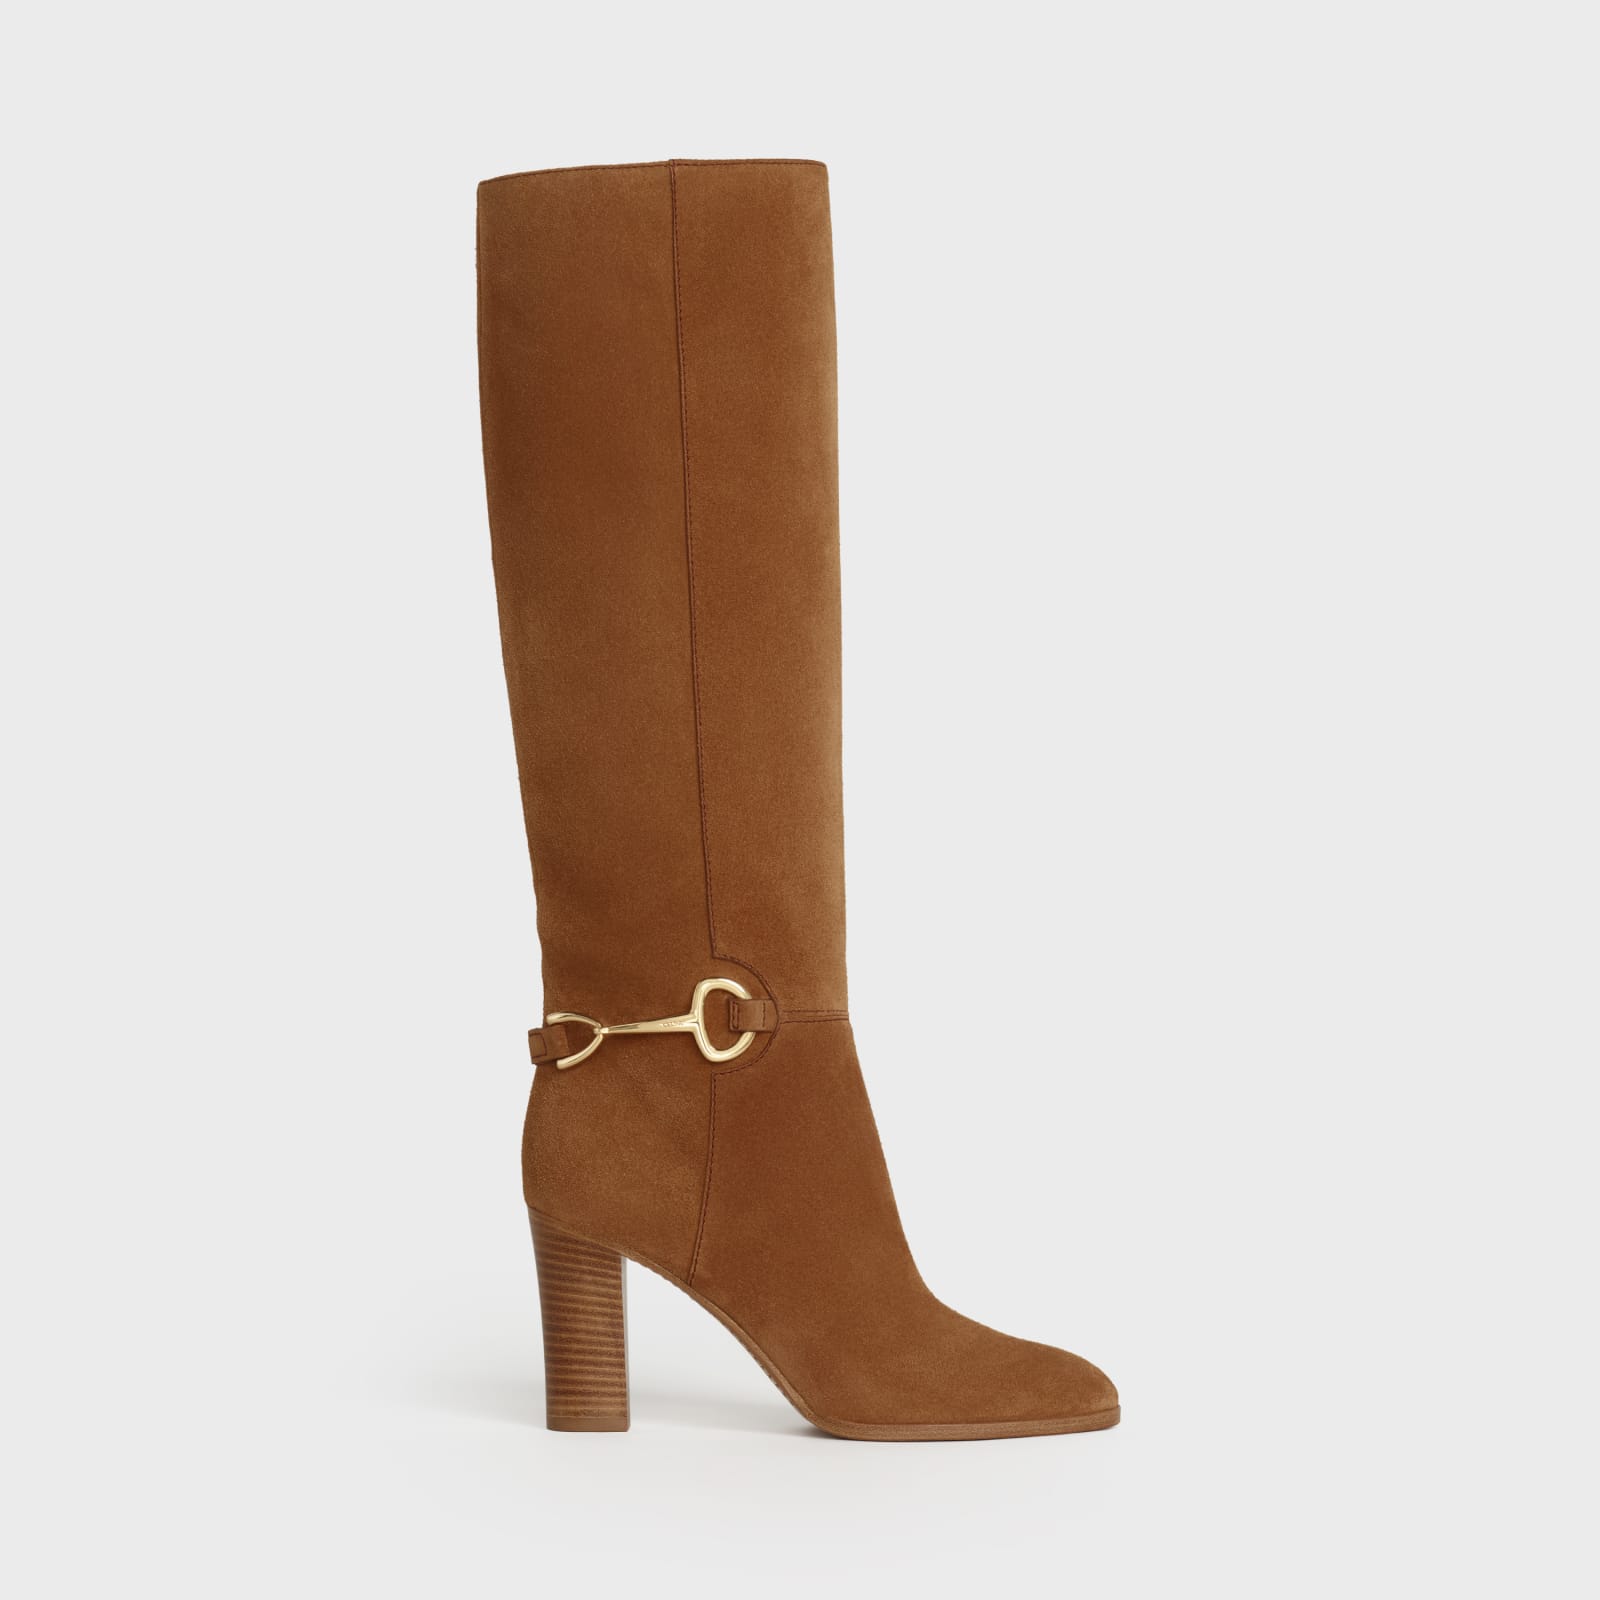 Celine Boots In Brown